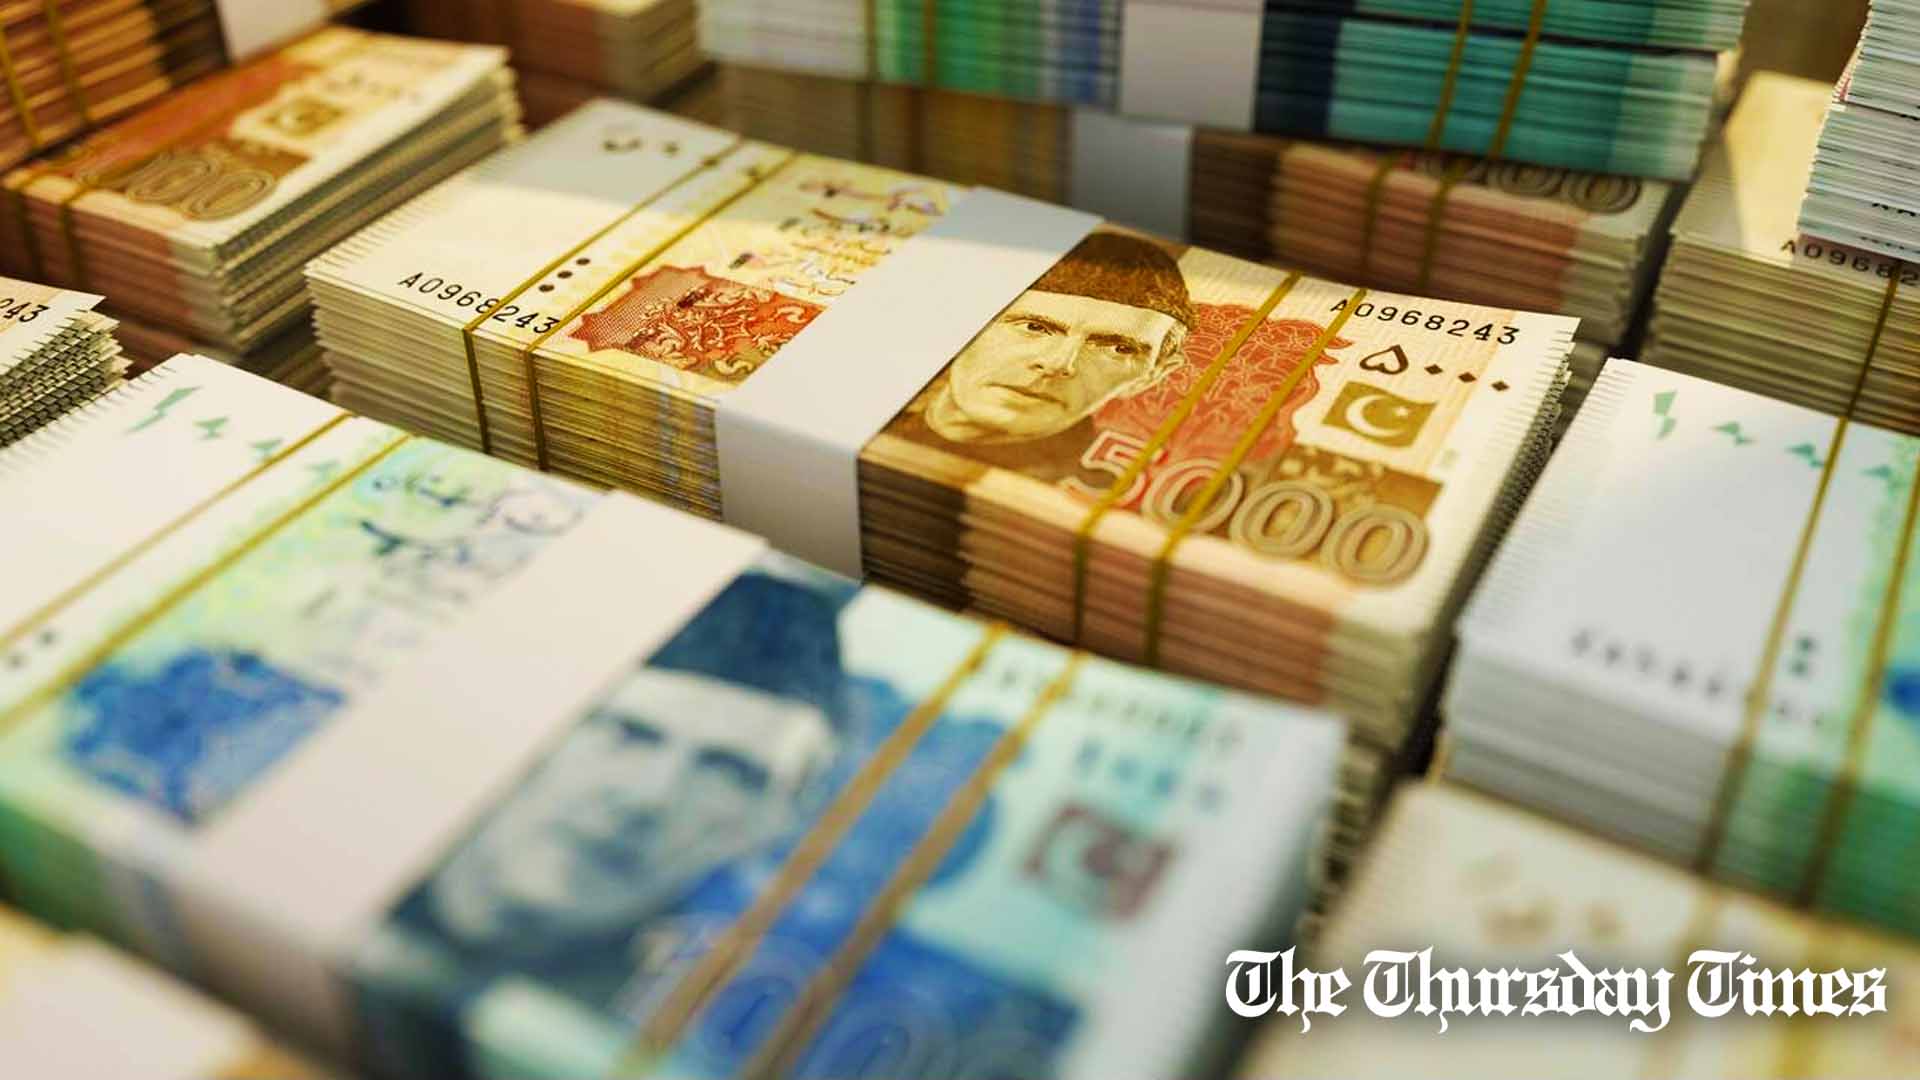 Pakistani rupee banknotes are shown. — FILE/THE THURSDAY TIMES